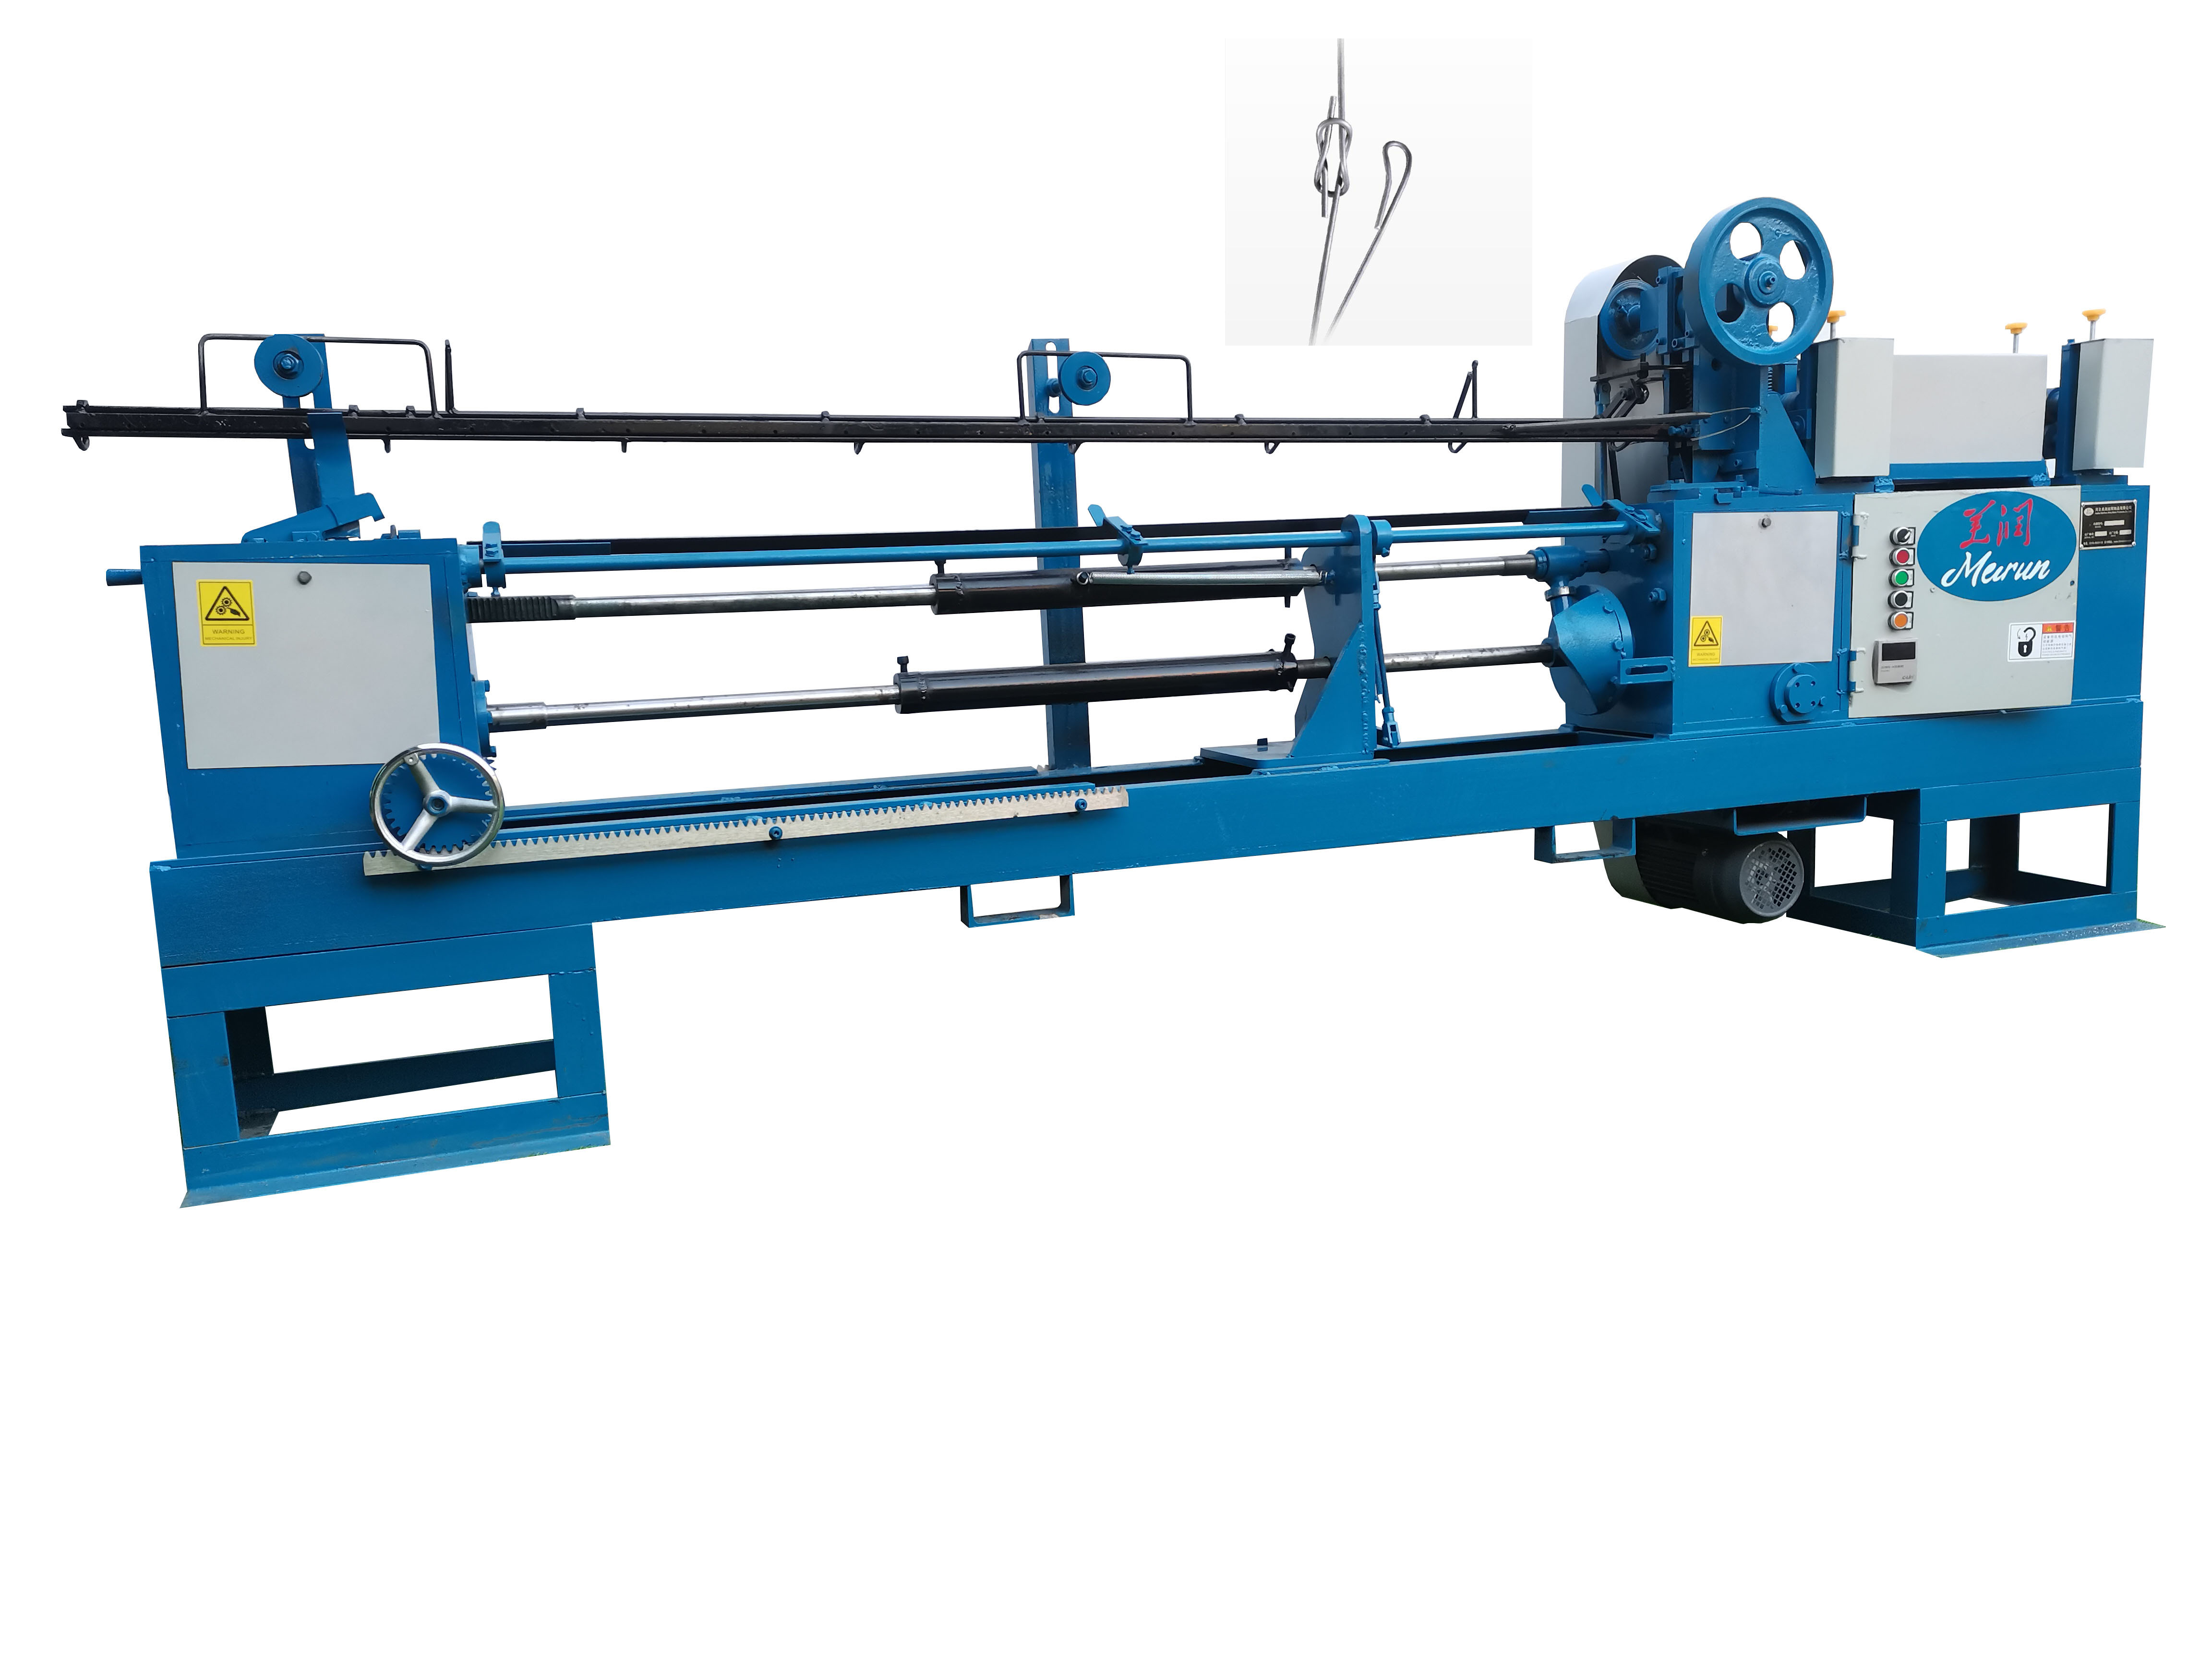 With Best Service Cotton Bale Tie Making Machine with Iron Or Stainless Steel